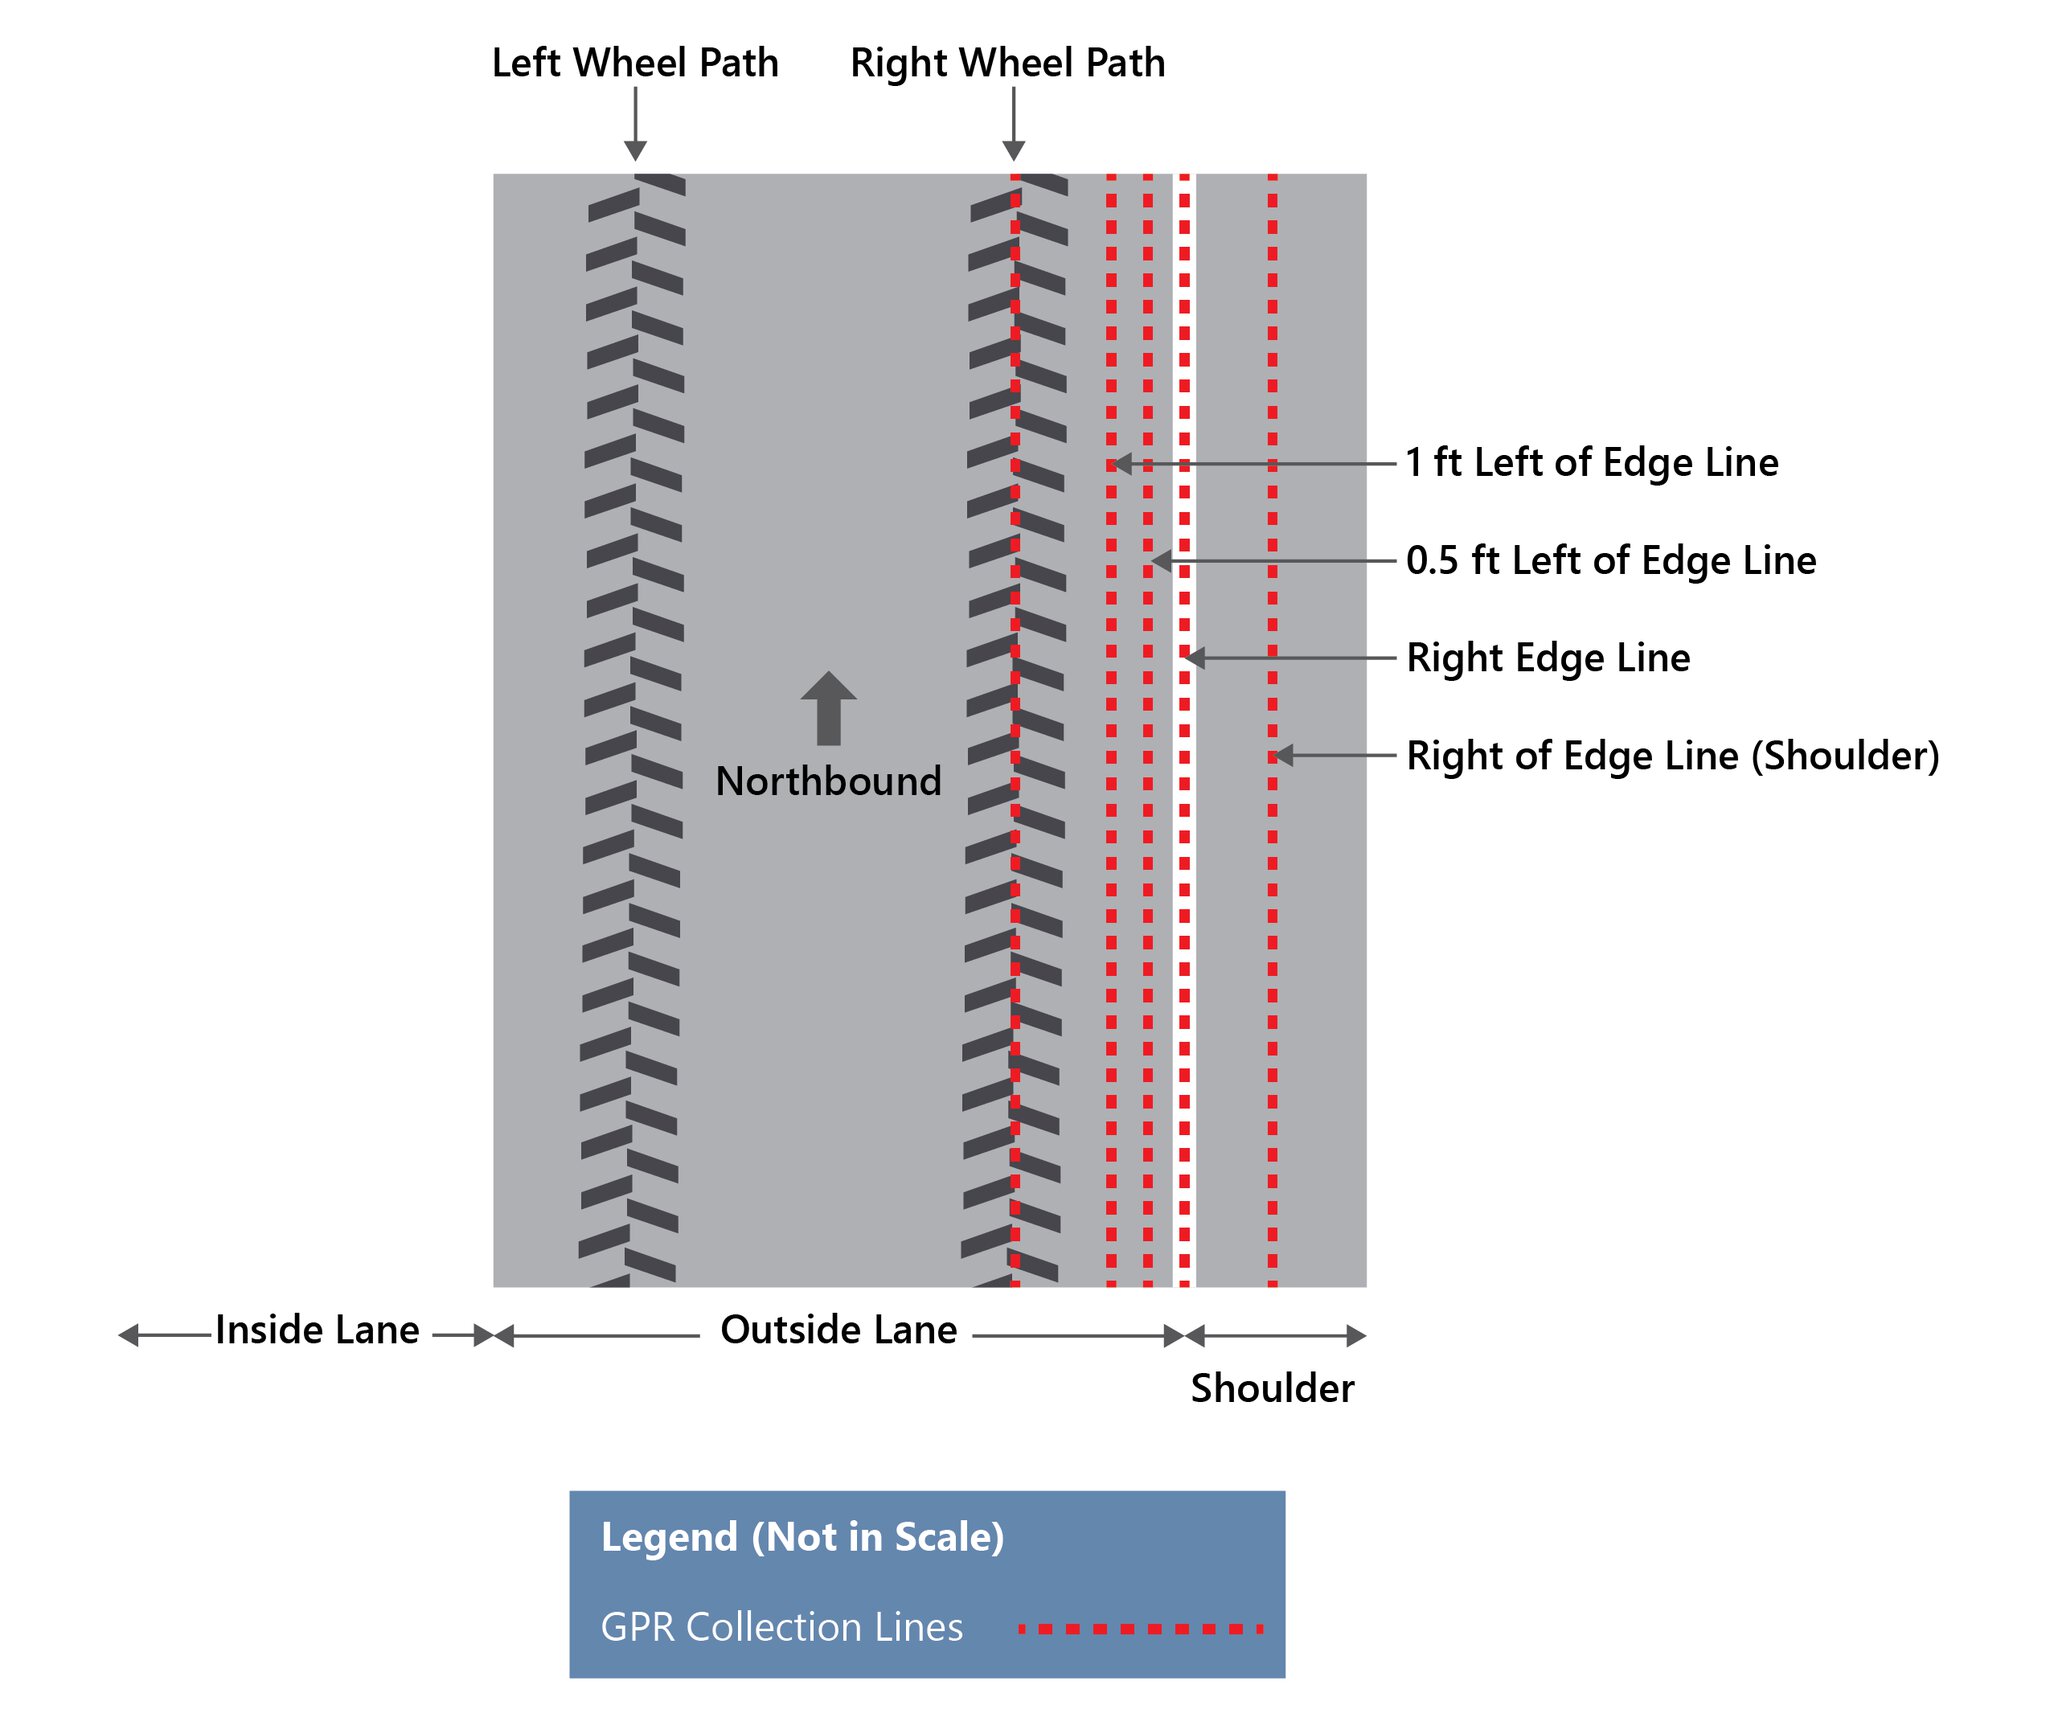 Diagram showing five different GPR (ground penetrating radar) collection paths from Pennsylvania Department of Transportation Ground Penetrating Radar (GPR) Survey